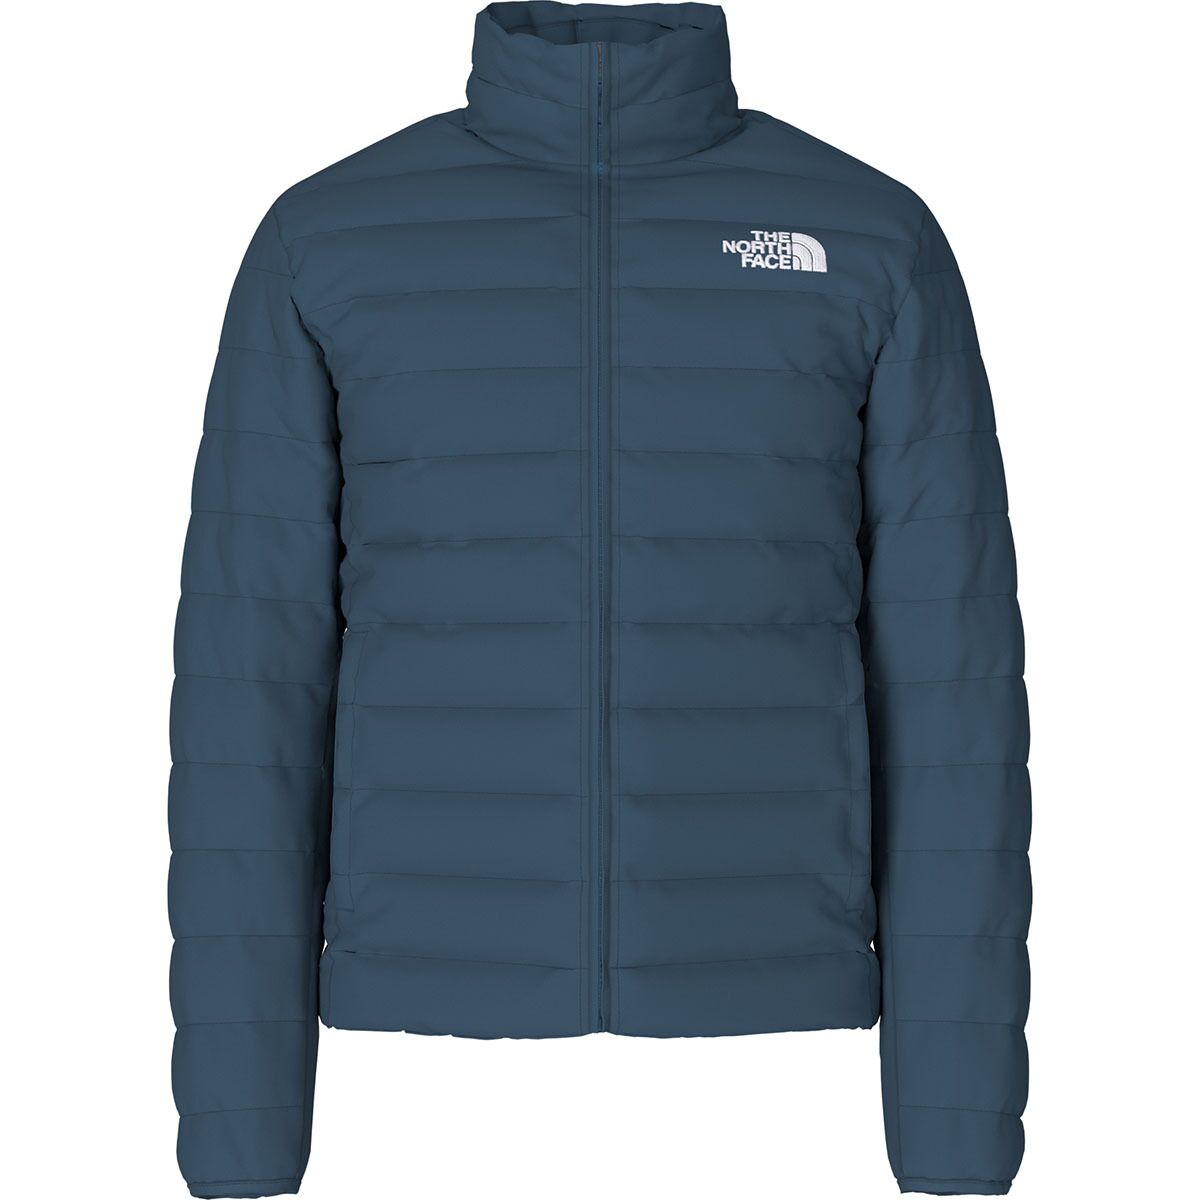 The North Face Flare Jacket - Men's